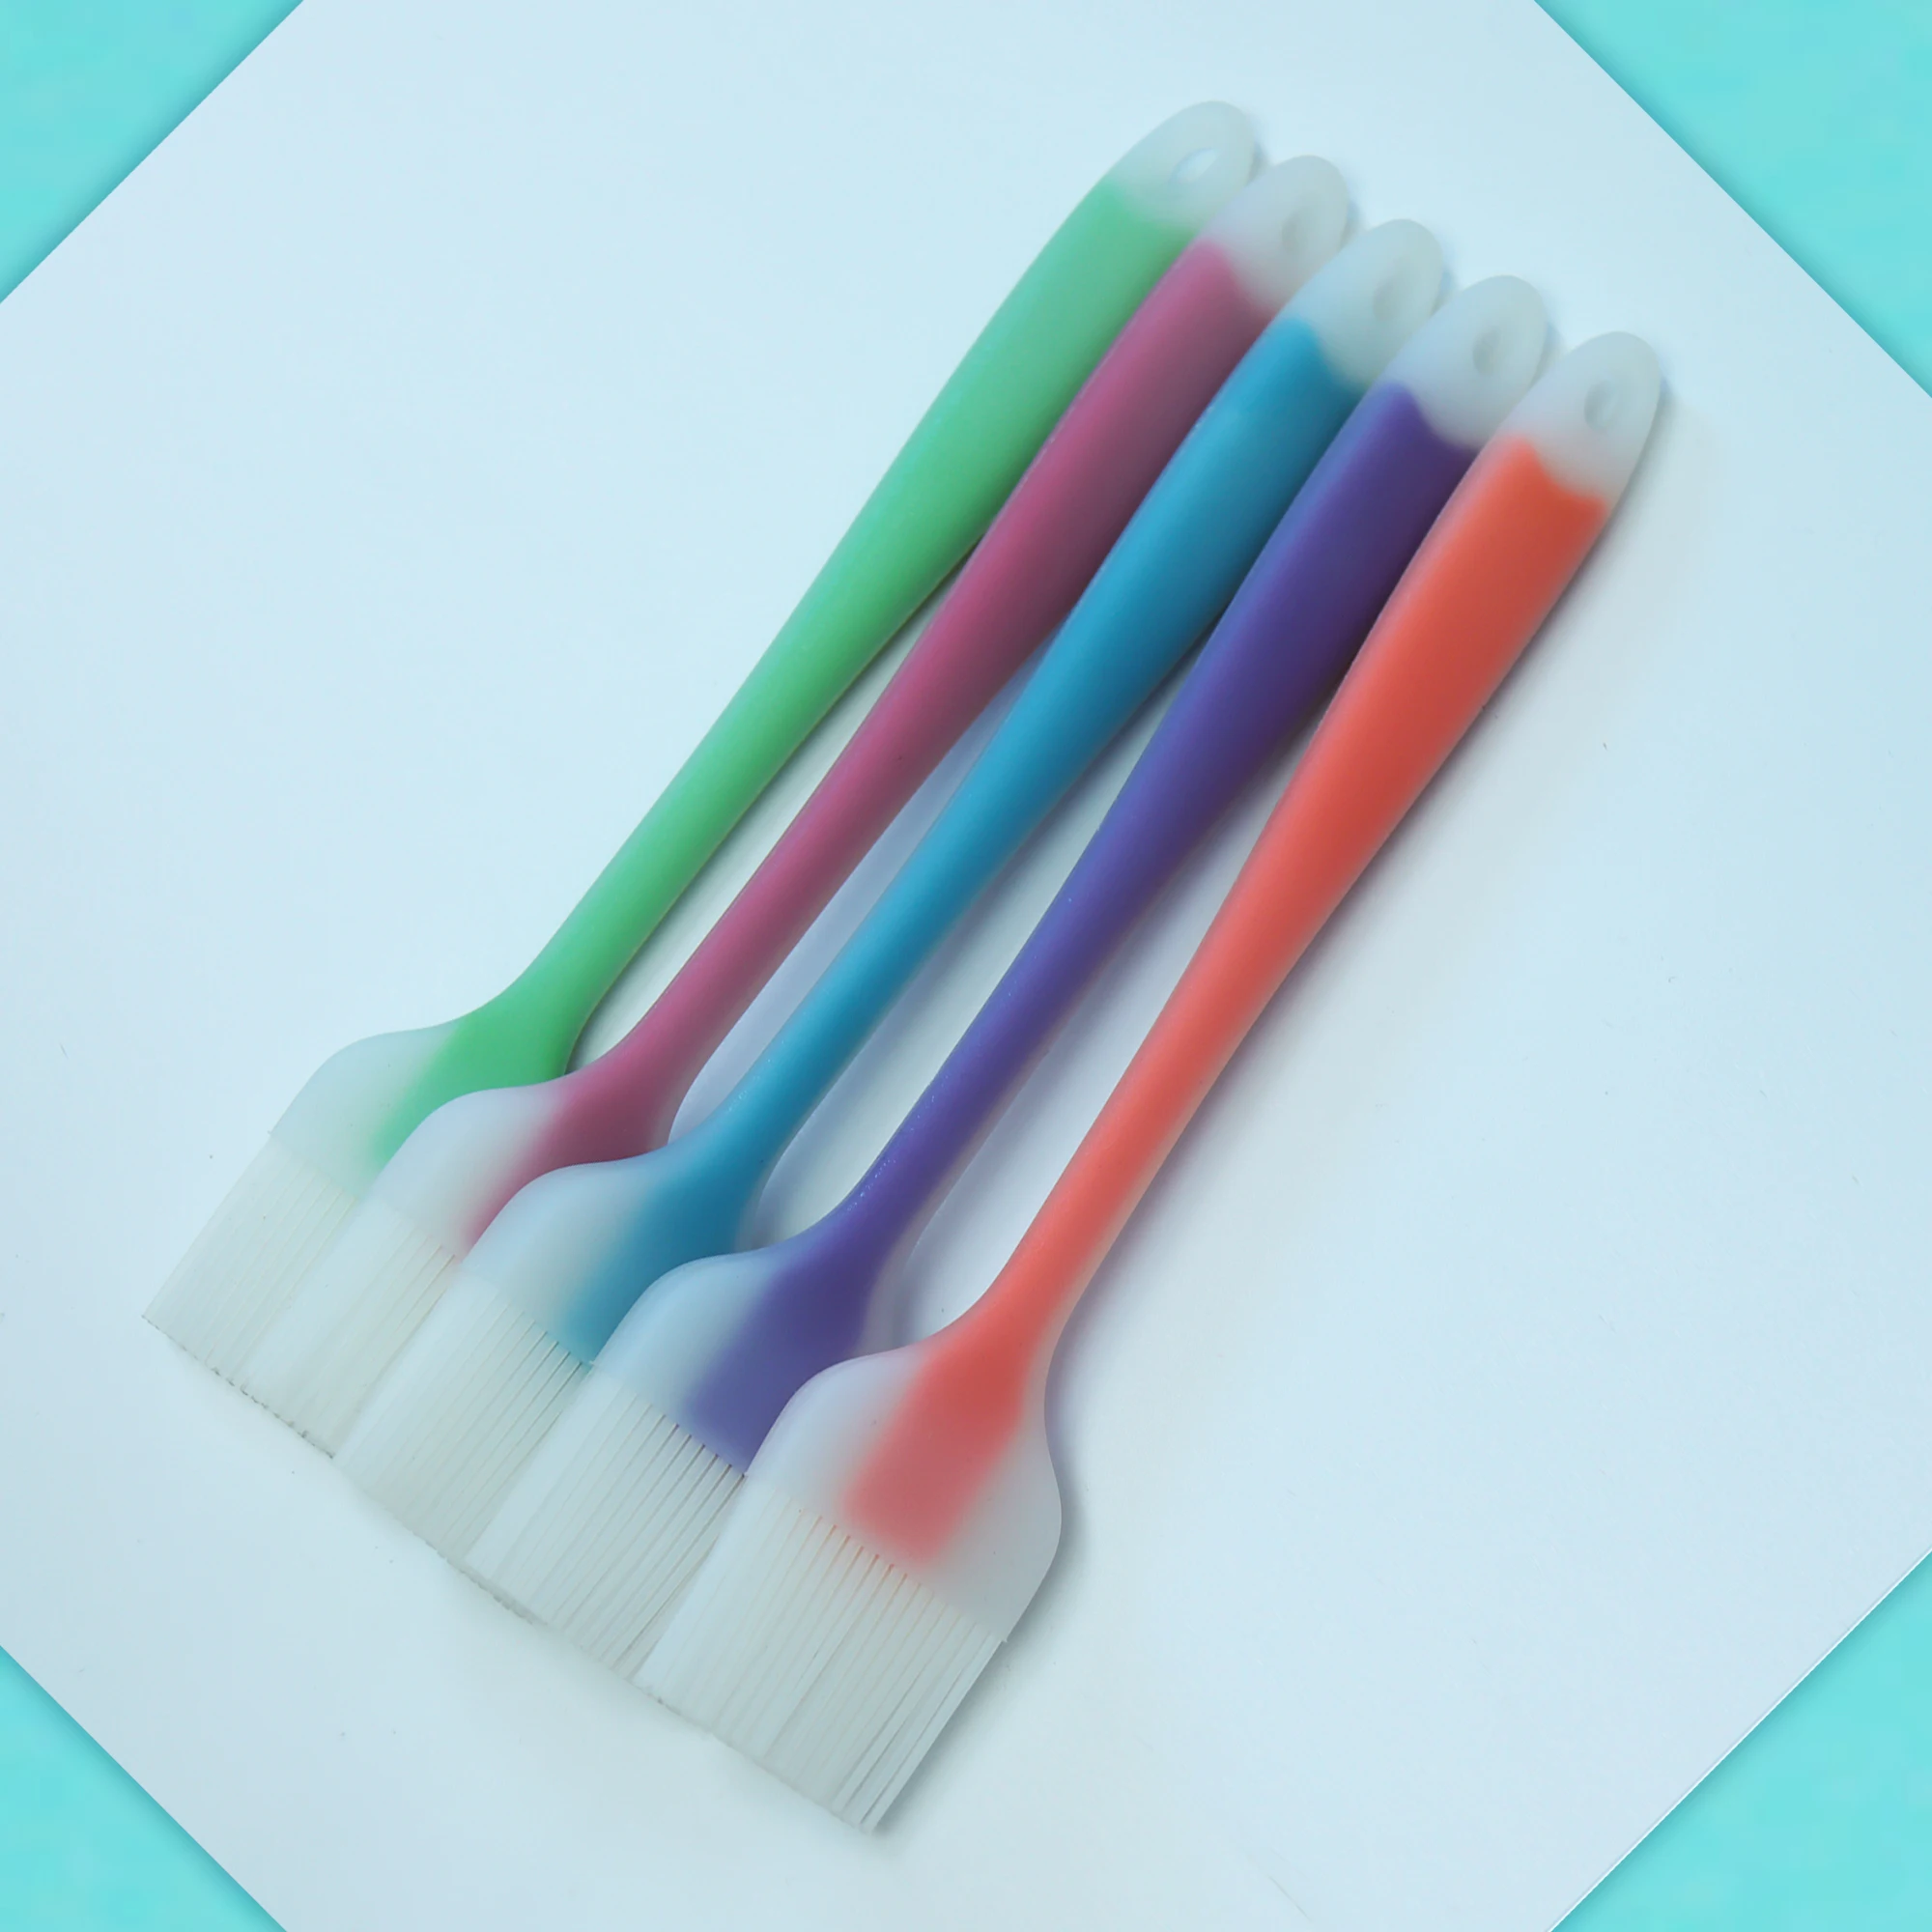 

Colorful Resist High Temperature Silicone Pastry Brush Cooking Oil Brush Kitchen Basting Baking Brush Silicone, Pink/blue/green/pruple/red